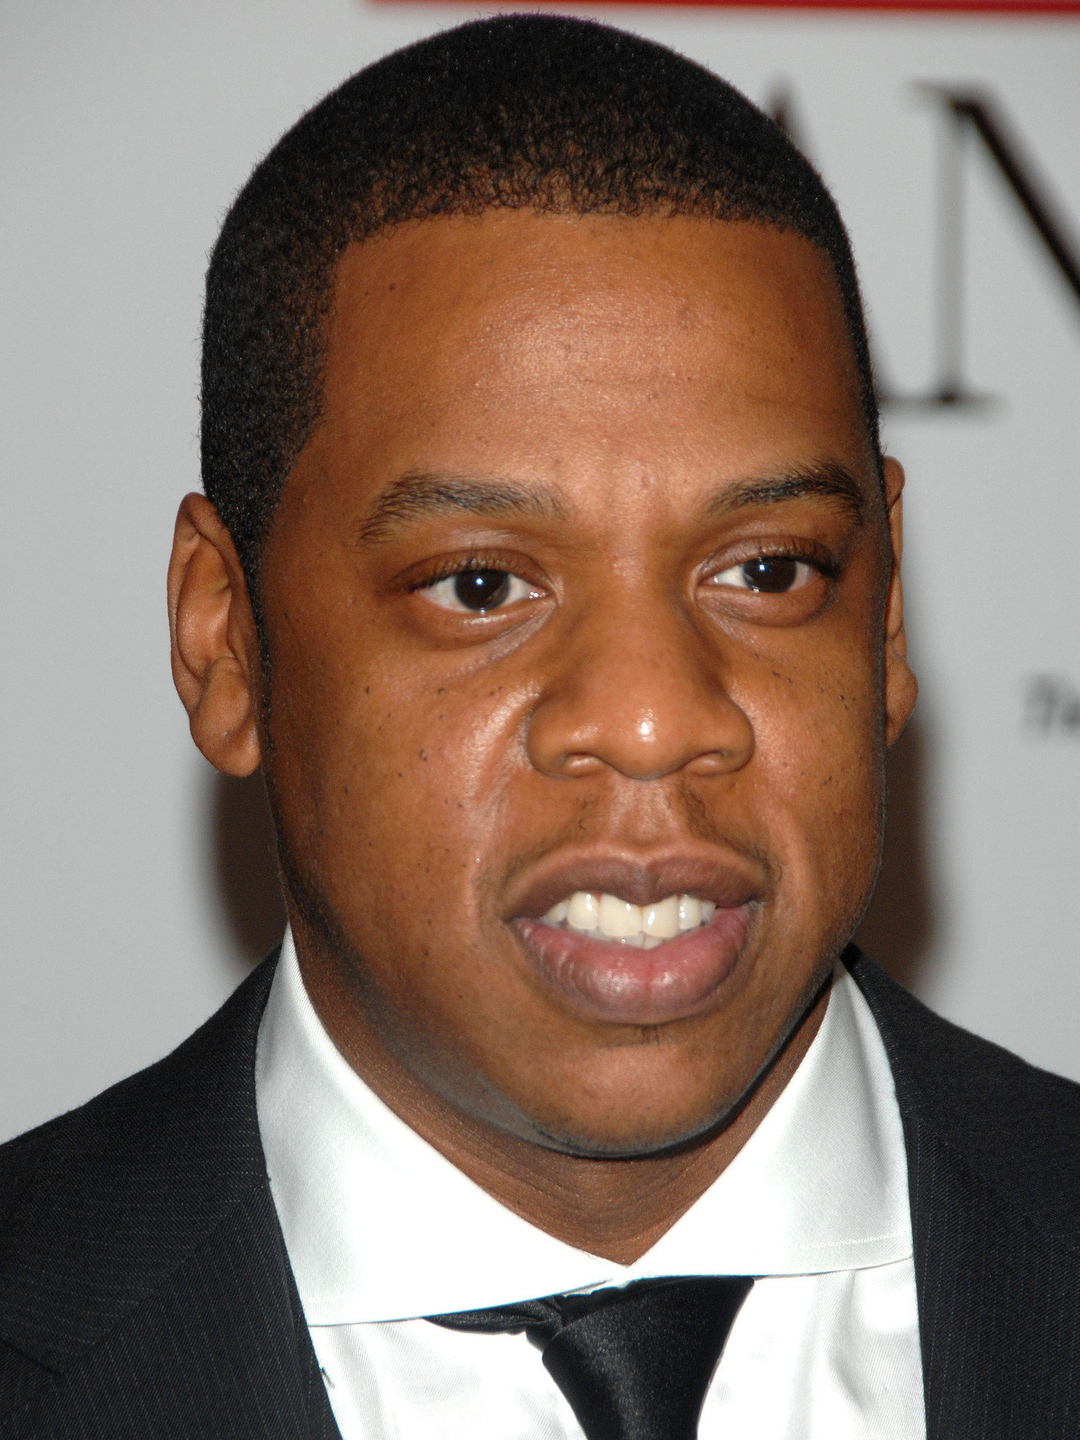 Jay-Z personal traits